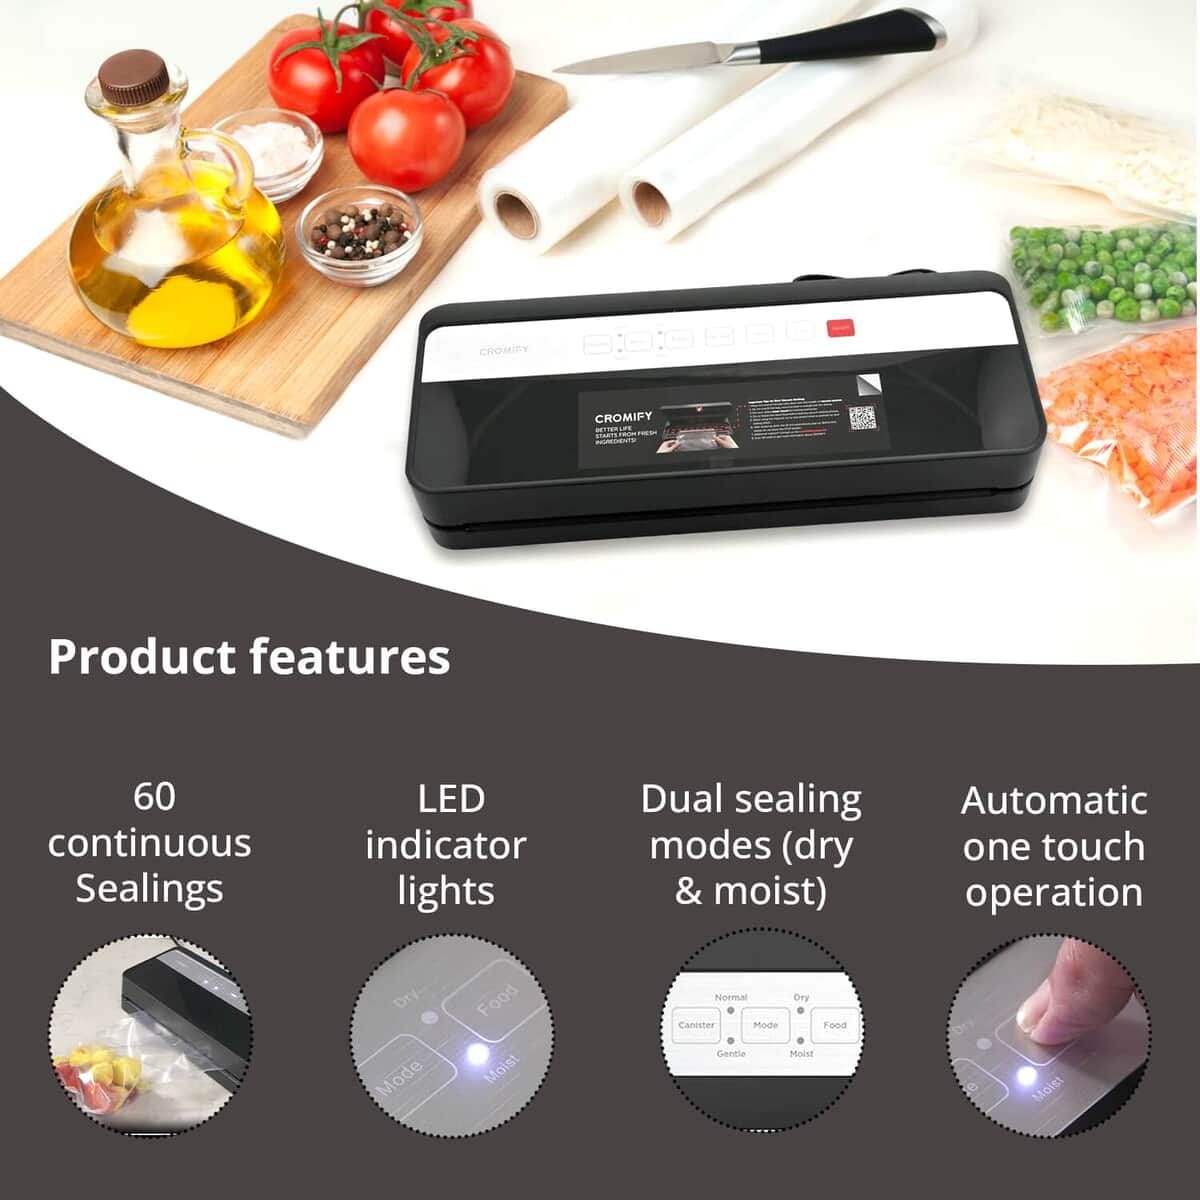 Cormify Black Vacuum Sealer System e9000-m, Compact Design Vacuum Sealing Machine For Automatic Food Sealer image number 2